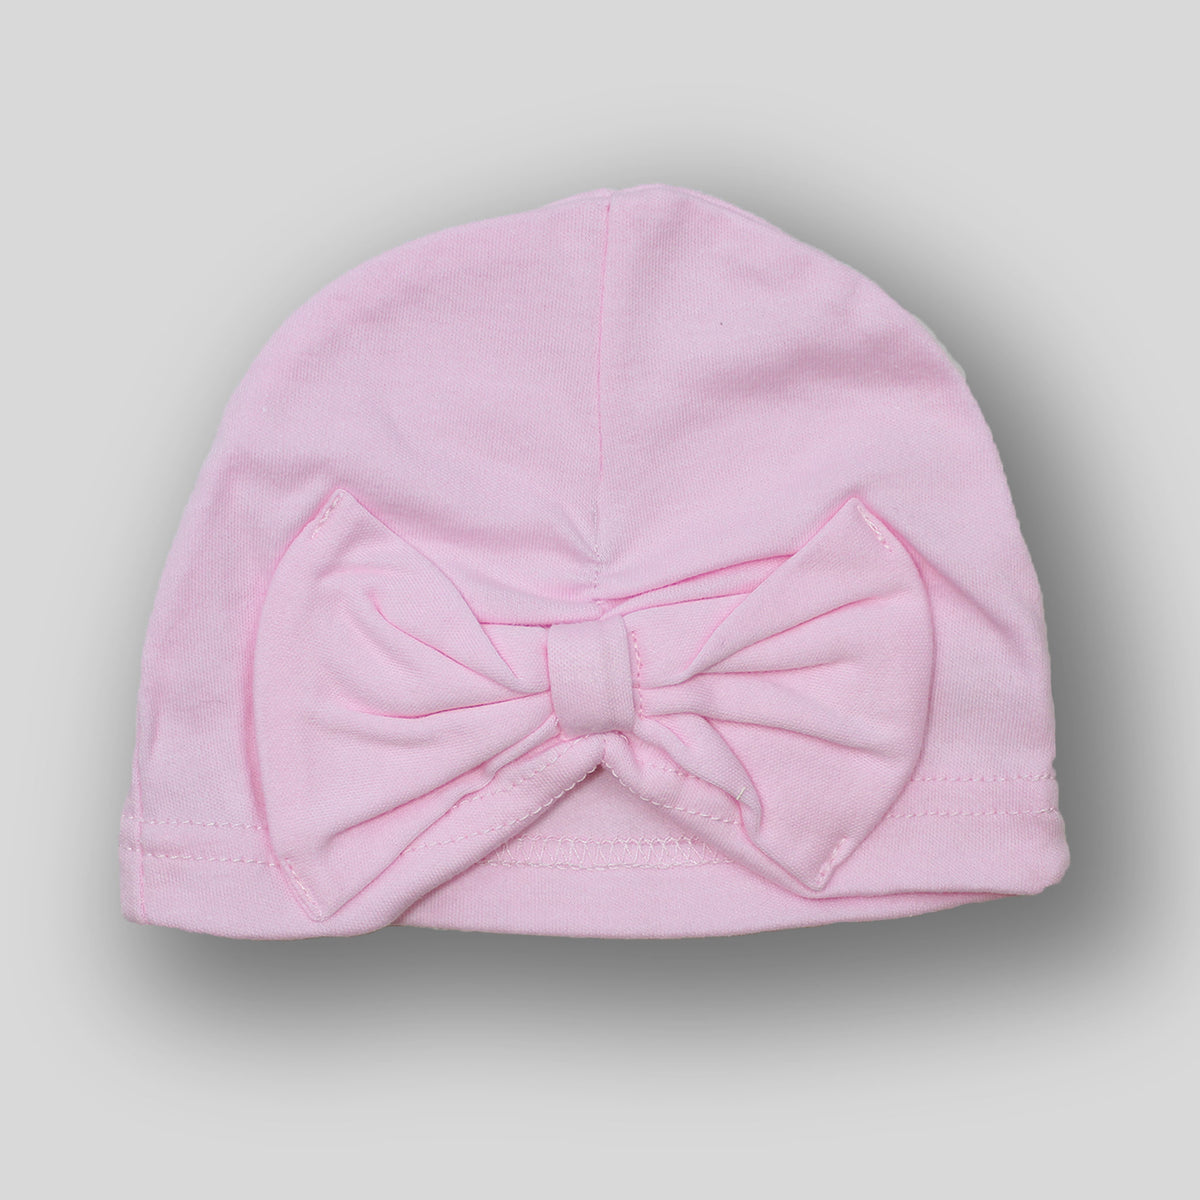 Cotton Baby Caps / Hats – Lullaby Lane Baby Shop